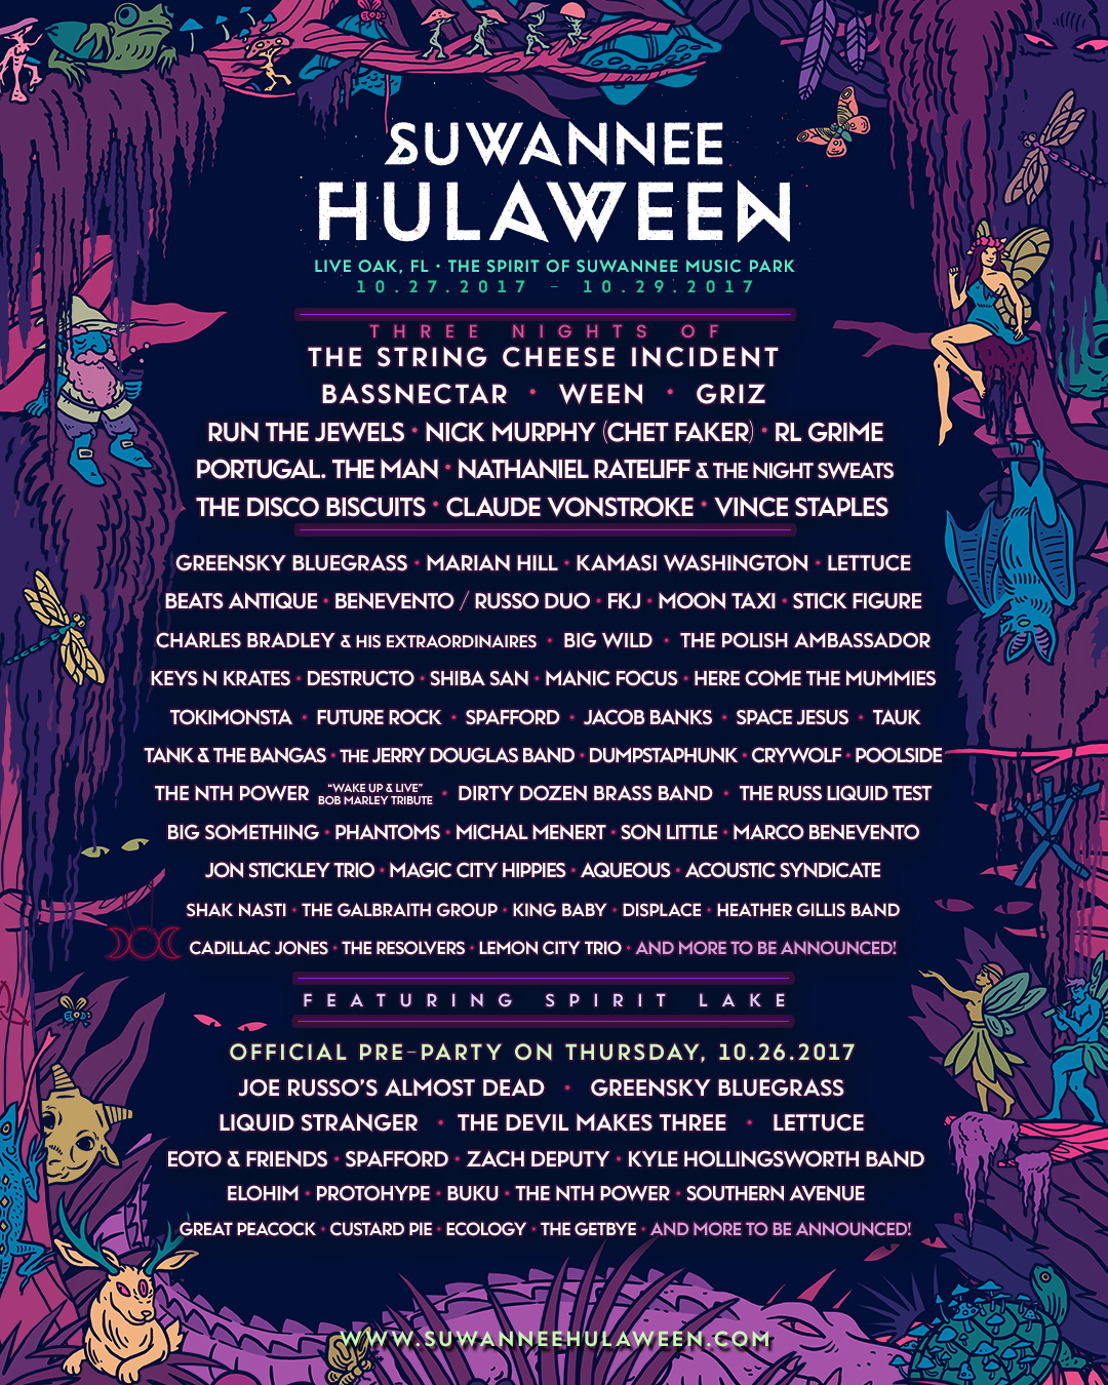 Suwannee Hulaween Announces Lineup for October 2729 2017 Event at The